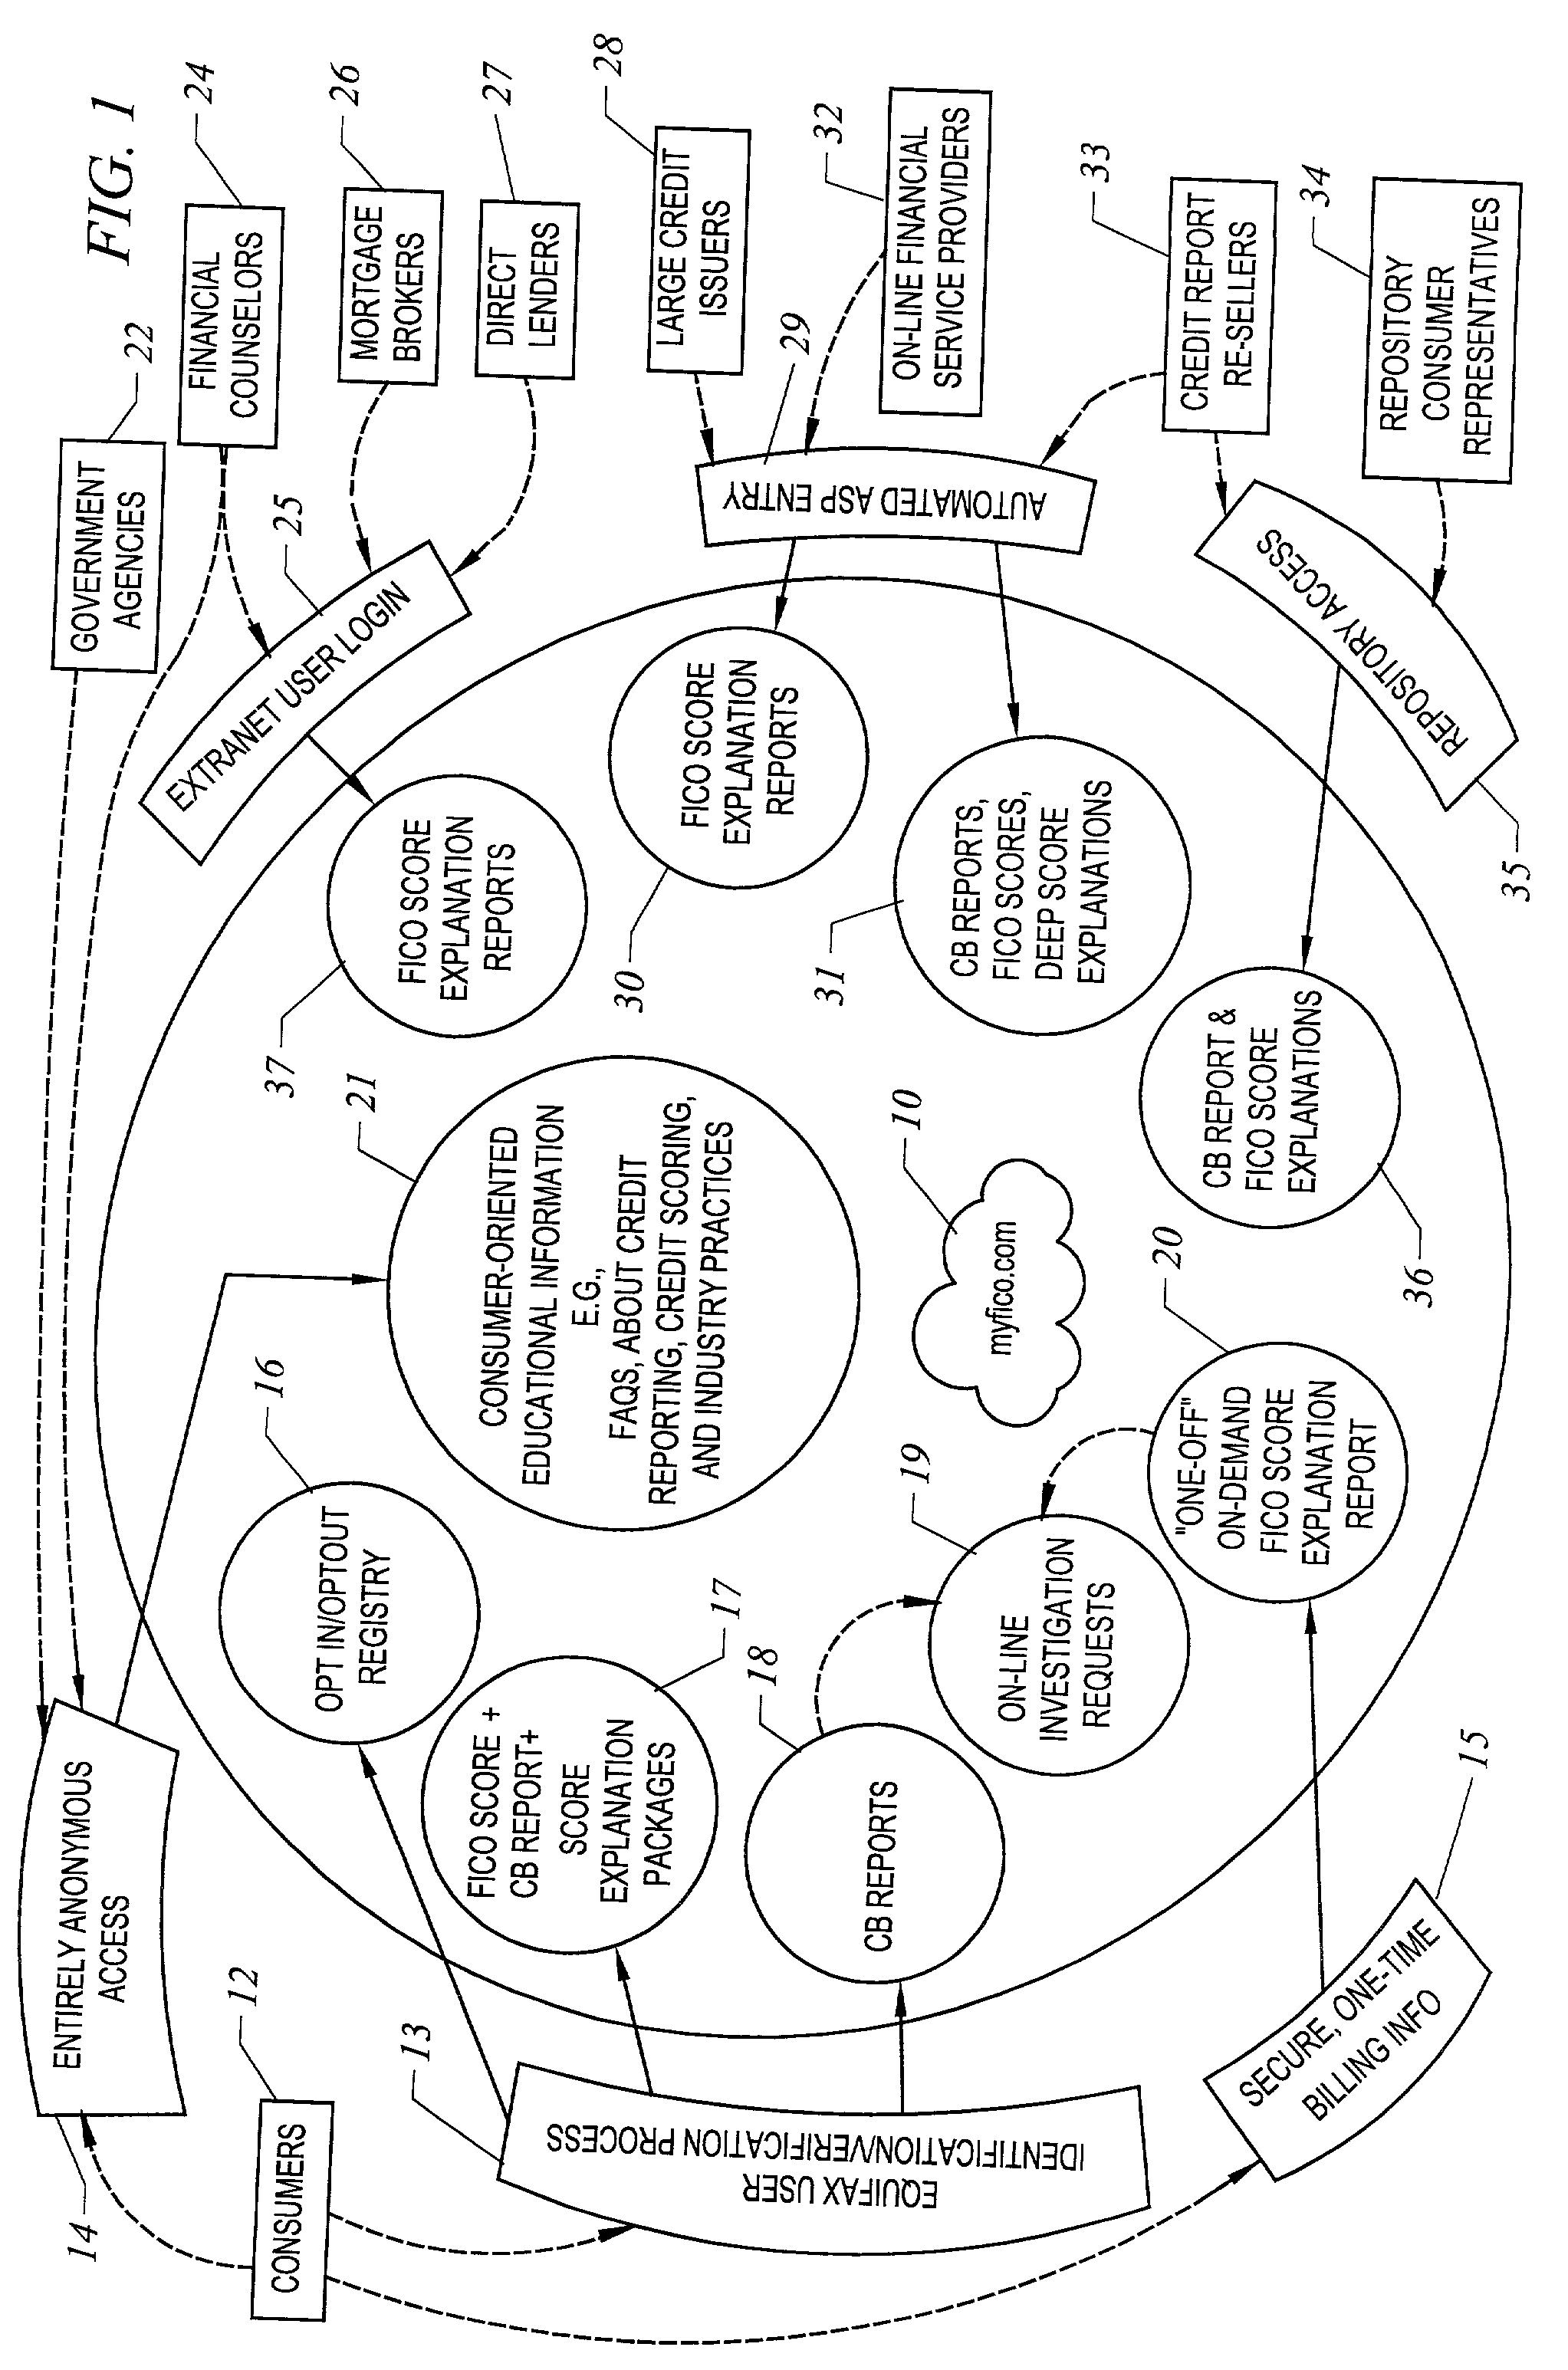 Method and apparatus for explaining credit scores